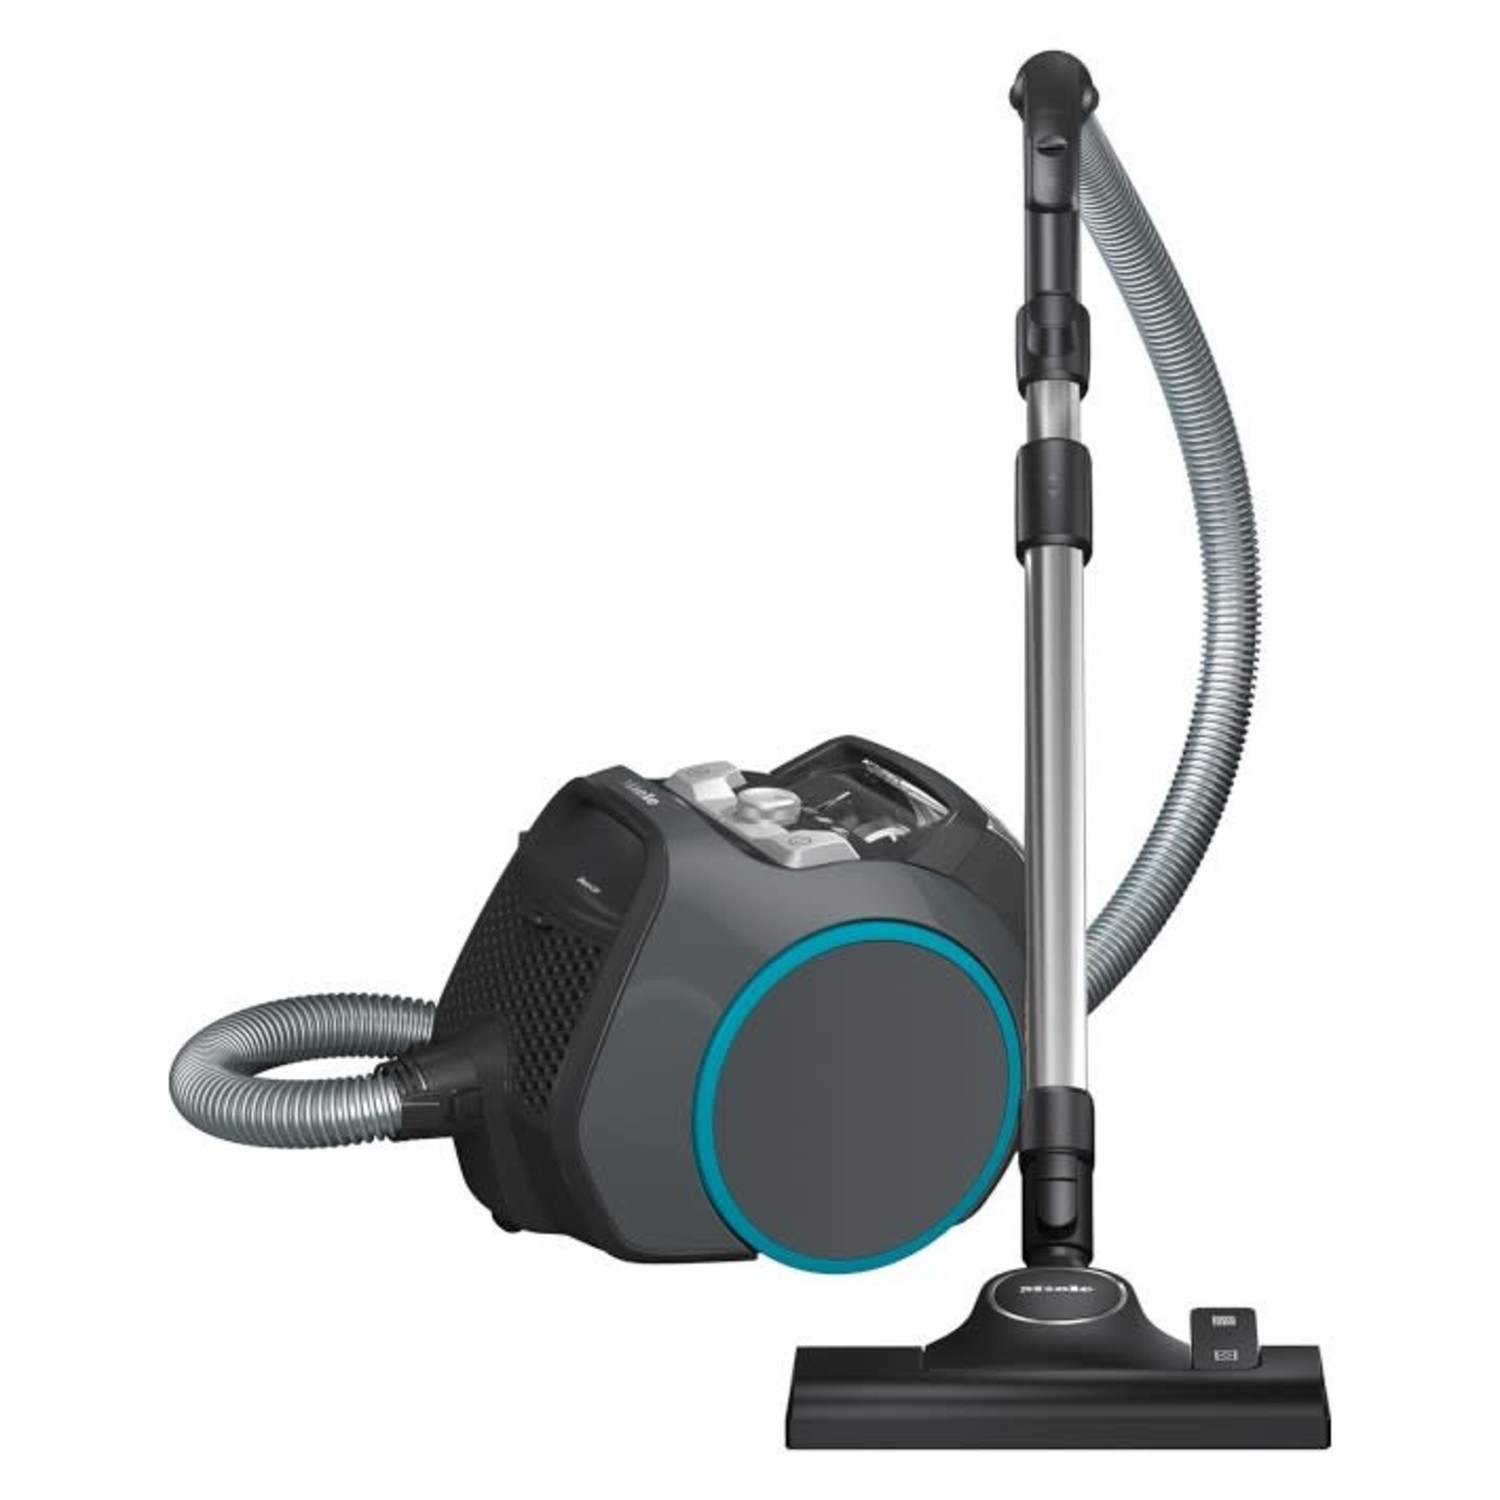 spellen Bron Attent Miele Bagless Canister Vacuum - Boost CX1 Powerline (Graphite Gray) -  MyVacuumPlace - Vacuums Etc